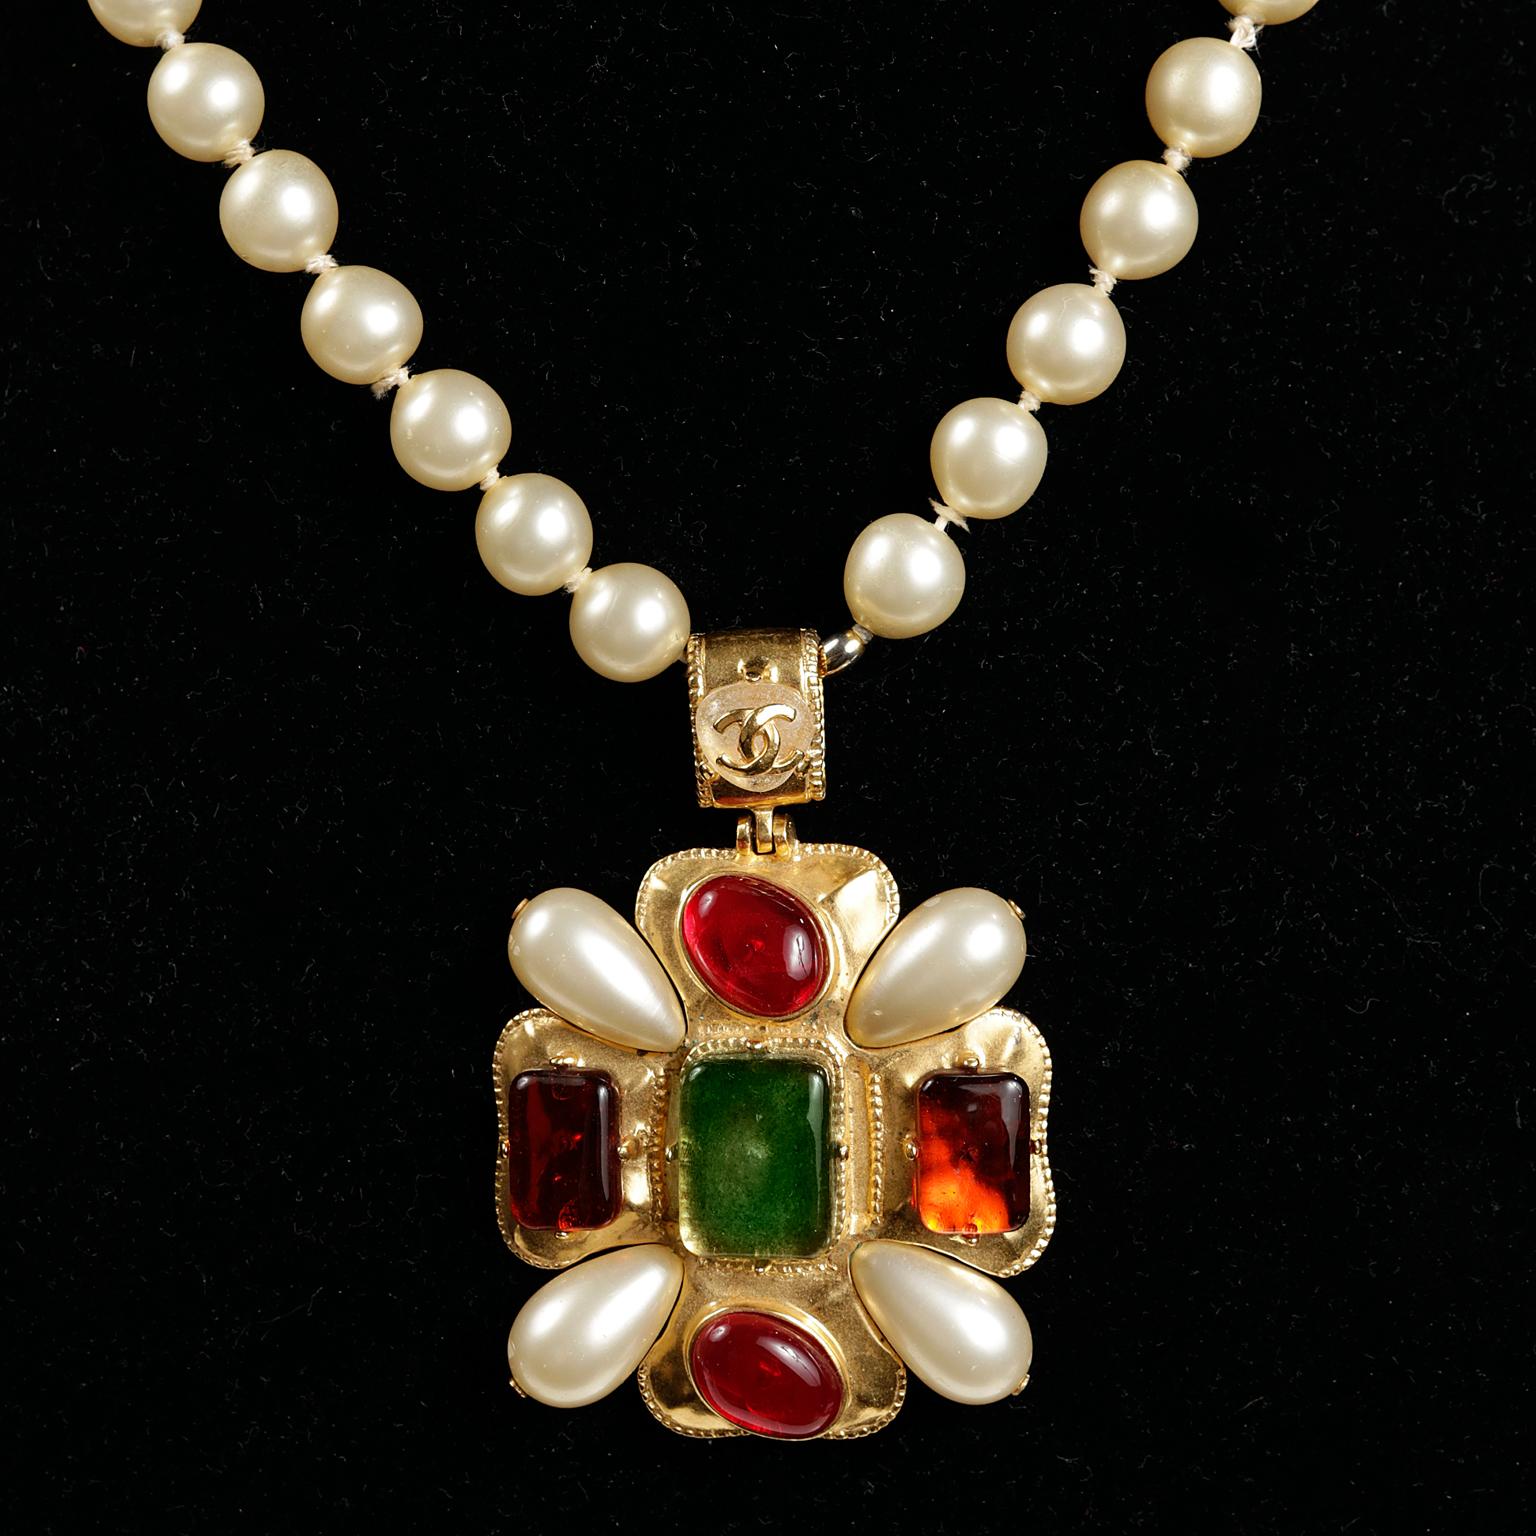 Chanel Gripoix and Pearl Necklace- excellent condition.  A beautiful and collectible piece from the Fall 1997 collection.
Large gold medallion with Gripoix stones in green, orange and red are anchored by faux pearls.  Dangles beautifully from a faux